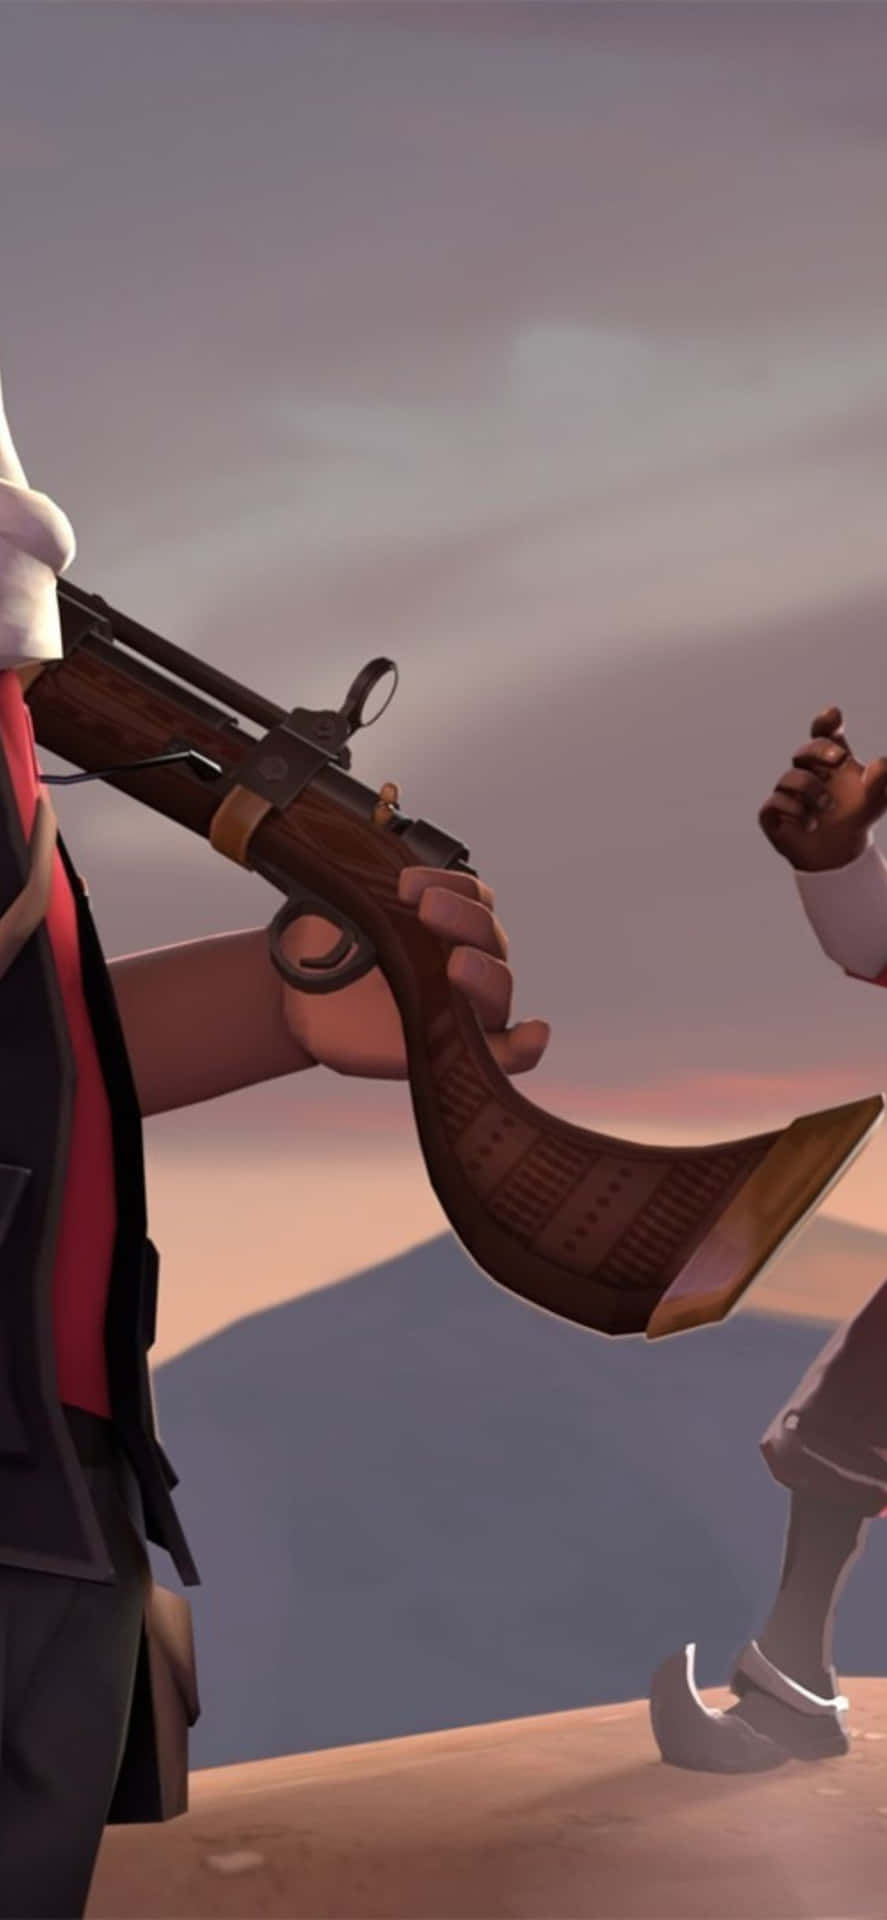 Join the Fight With Team Fortress 2 on iPhone Xs